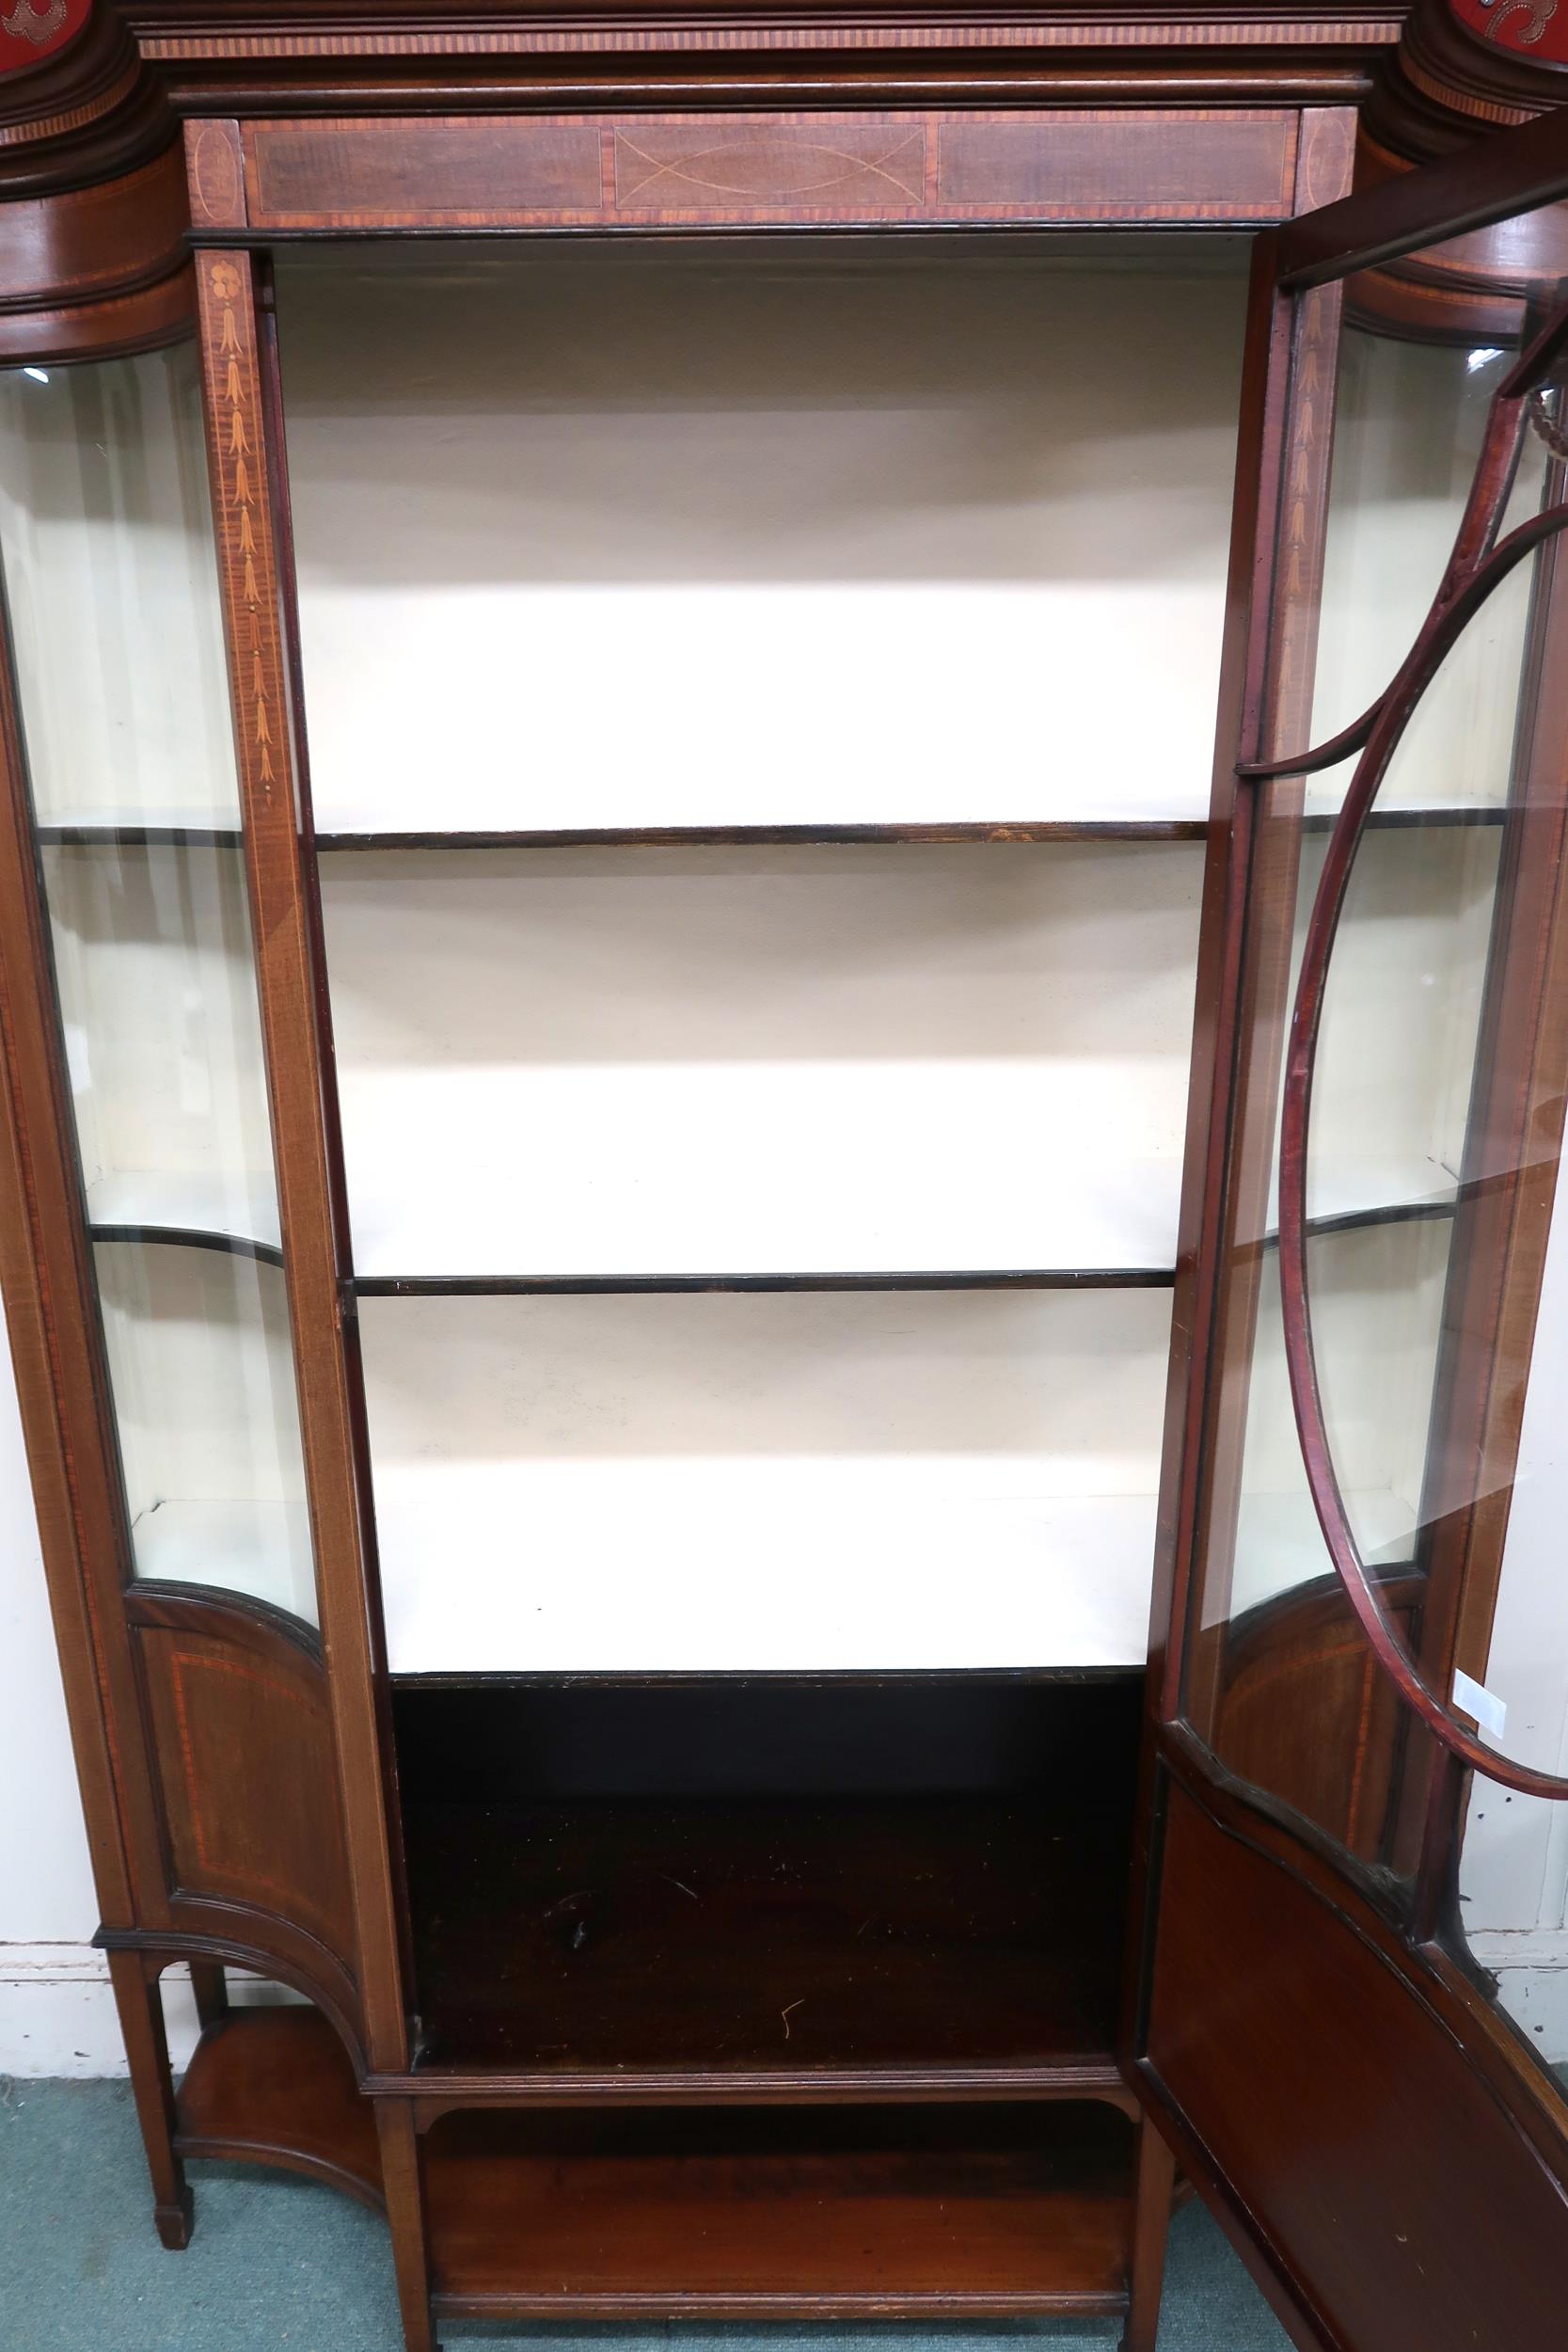 An Edwardian mahogany and satinwood inlaid display cabinet with moulded cornice over single glazed - Image 5 of 6